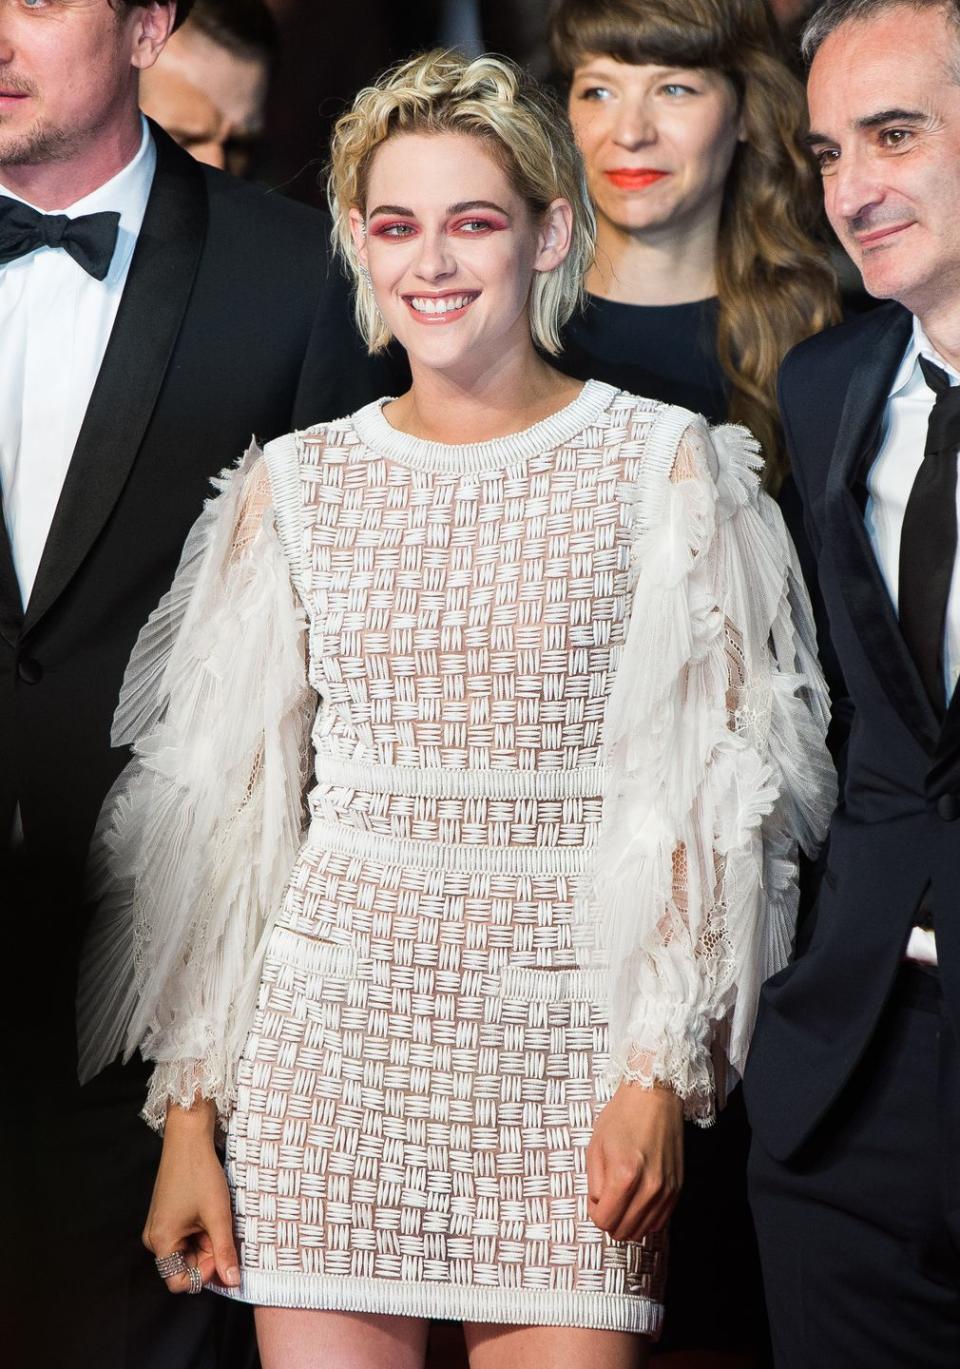 <p>Kristen Stewart in Chanel Resort 2017 at the premiere of 'Personal Shopper', the 69th annual Cannes Film Festival at the Palais des Festivals, May 2016</p>